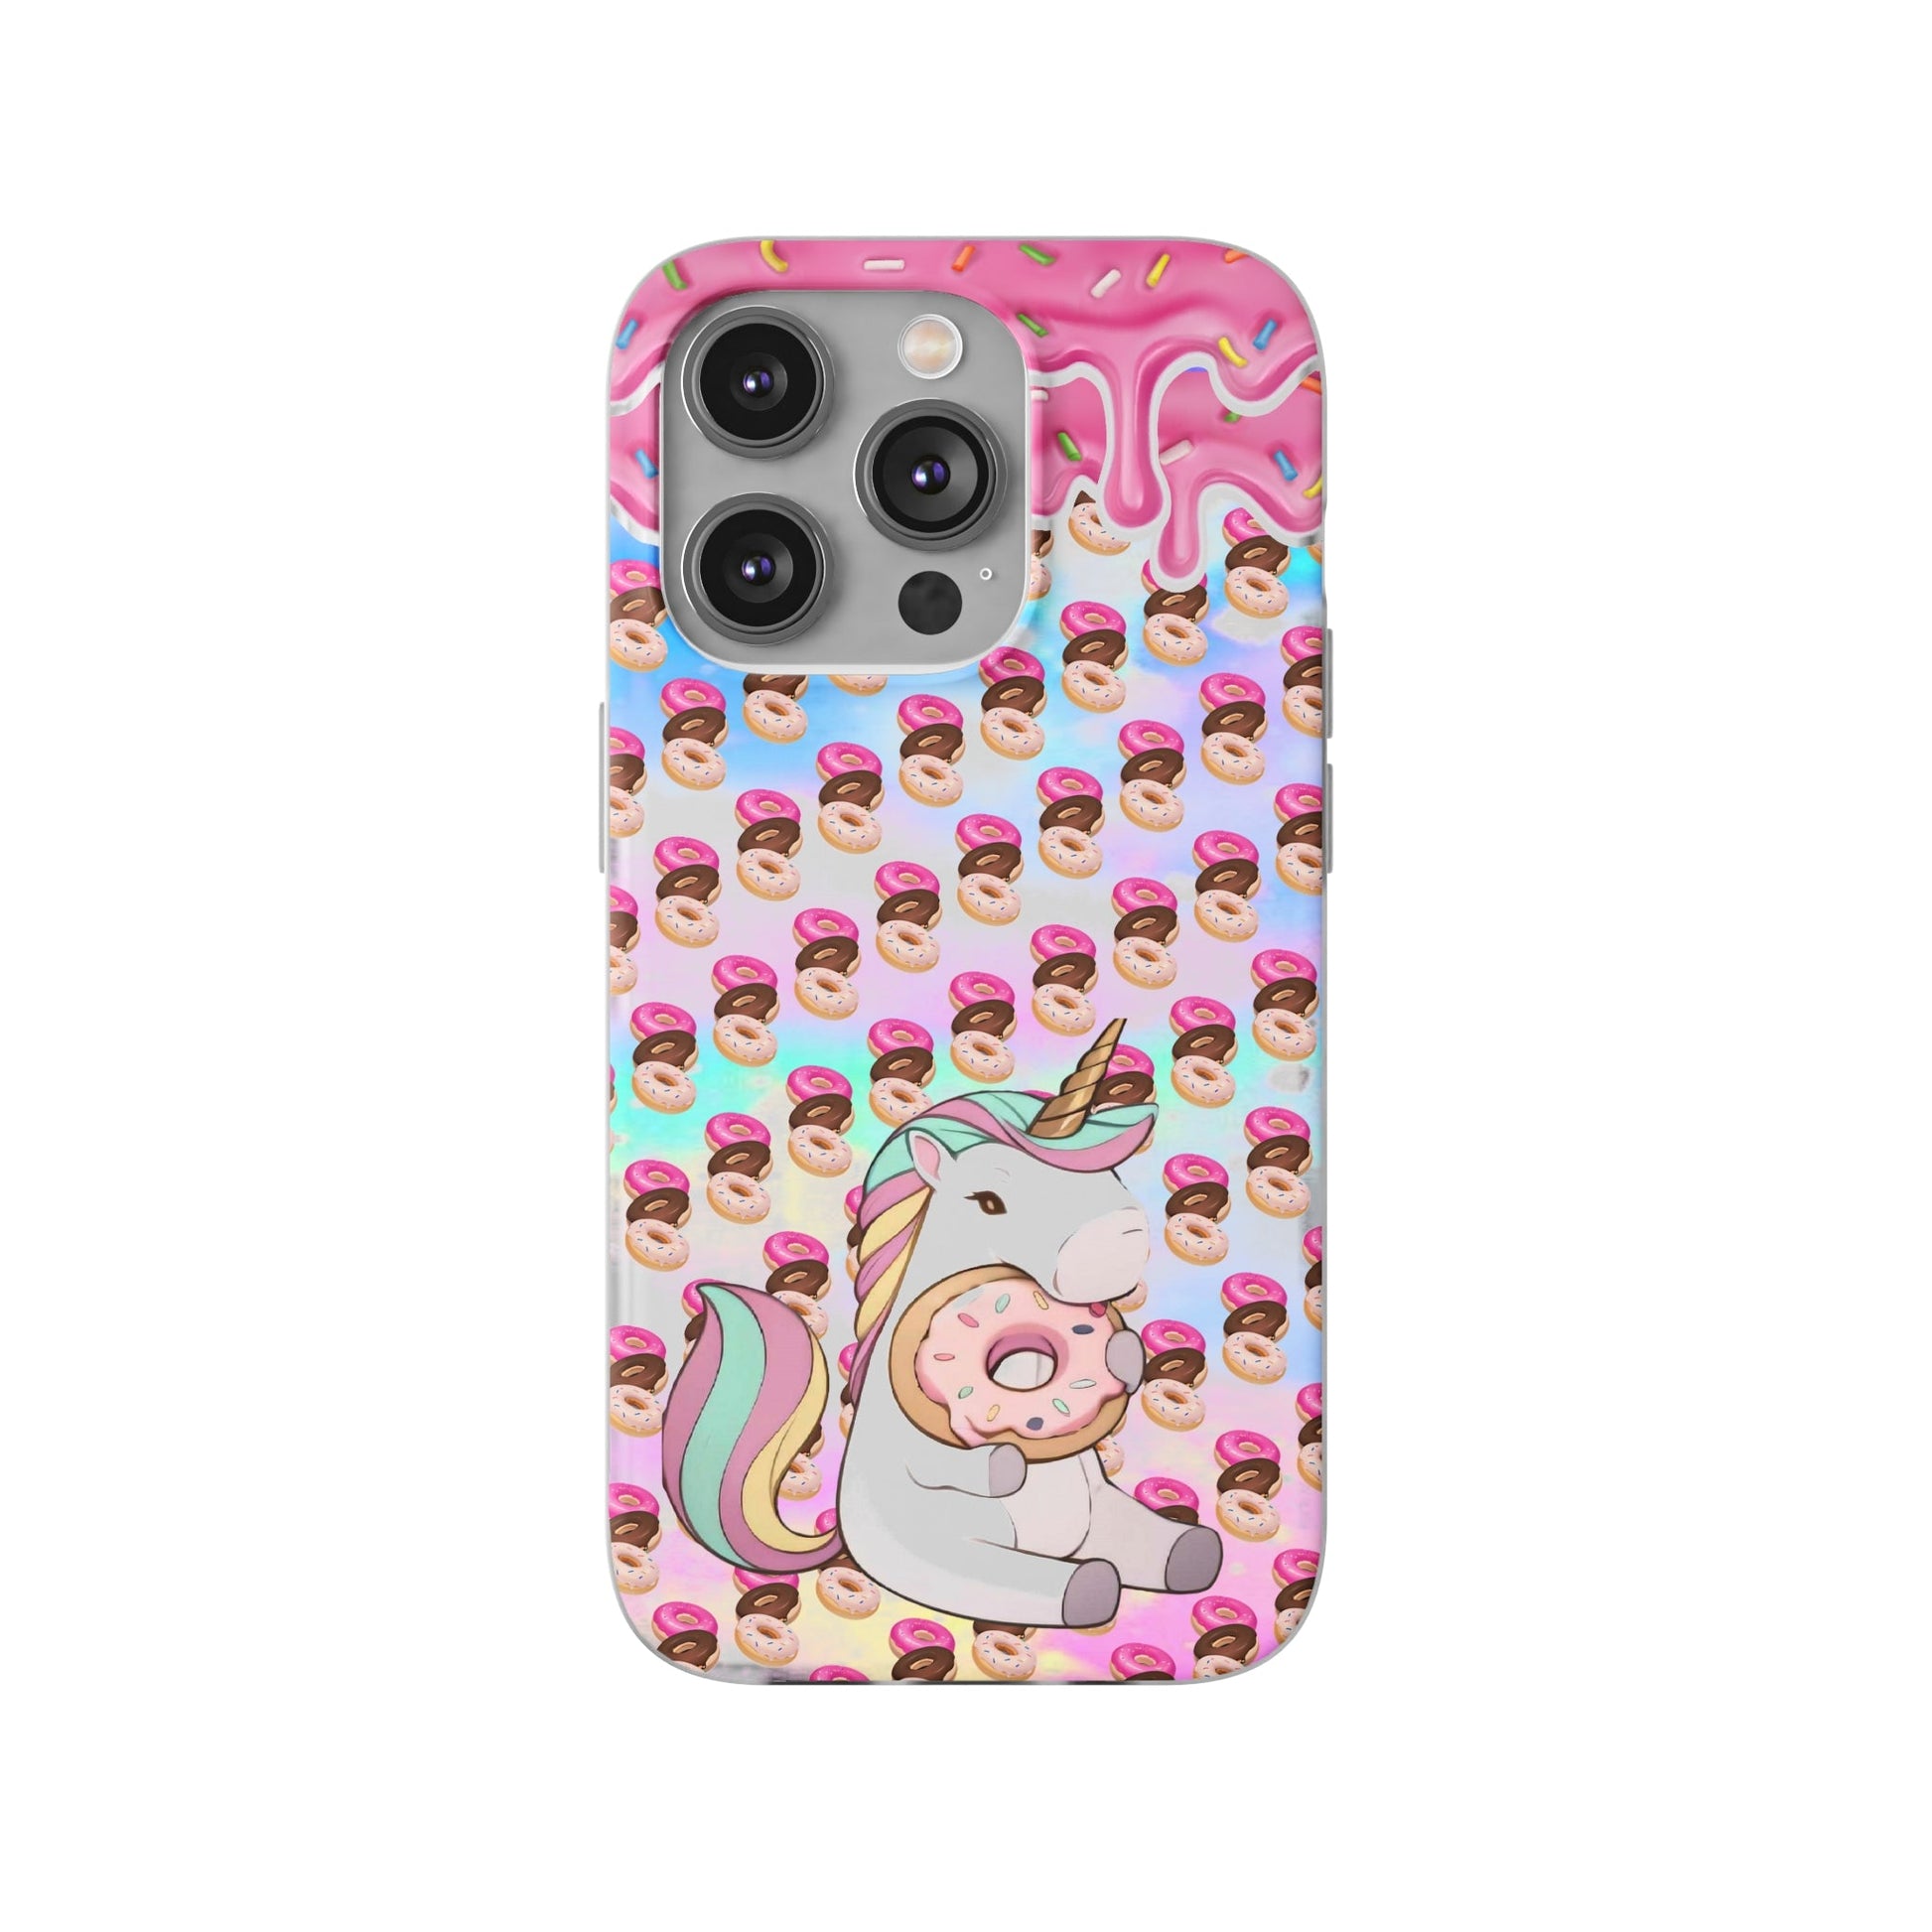 Stand out  with the  My little doughnut Flexi Cases  available at Hey Nugget. Grab yours today!